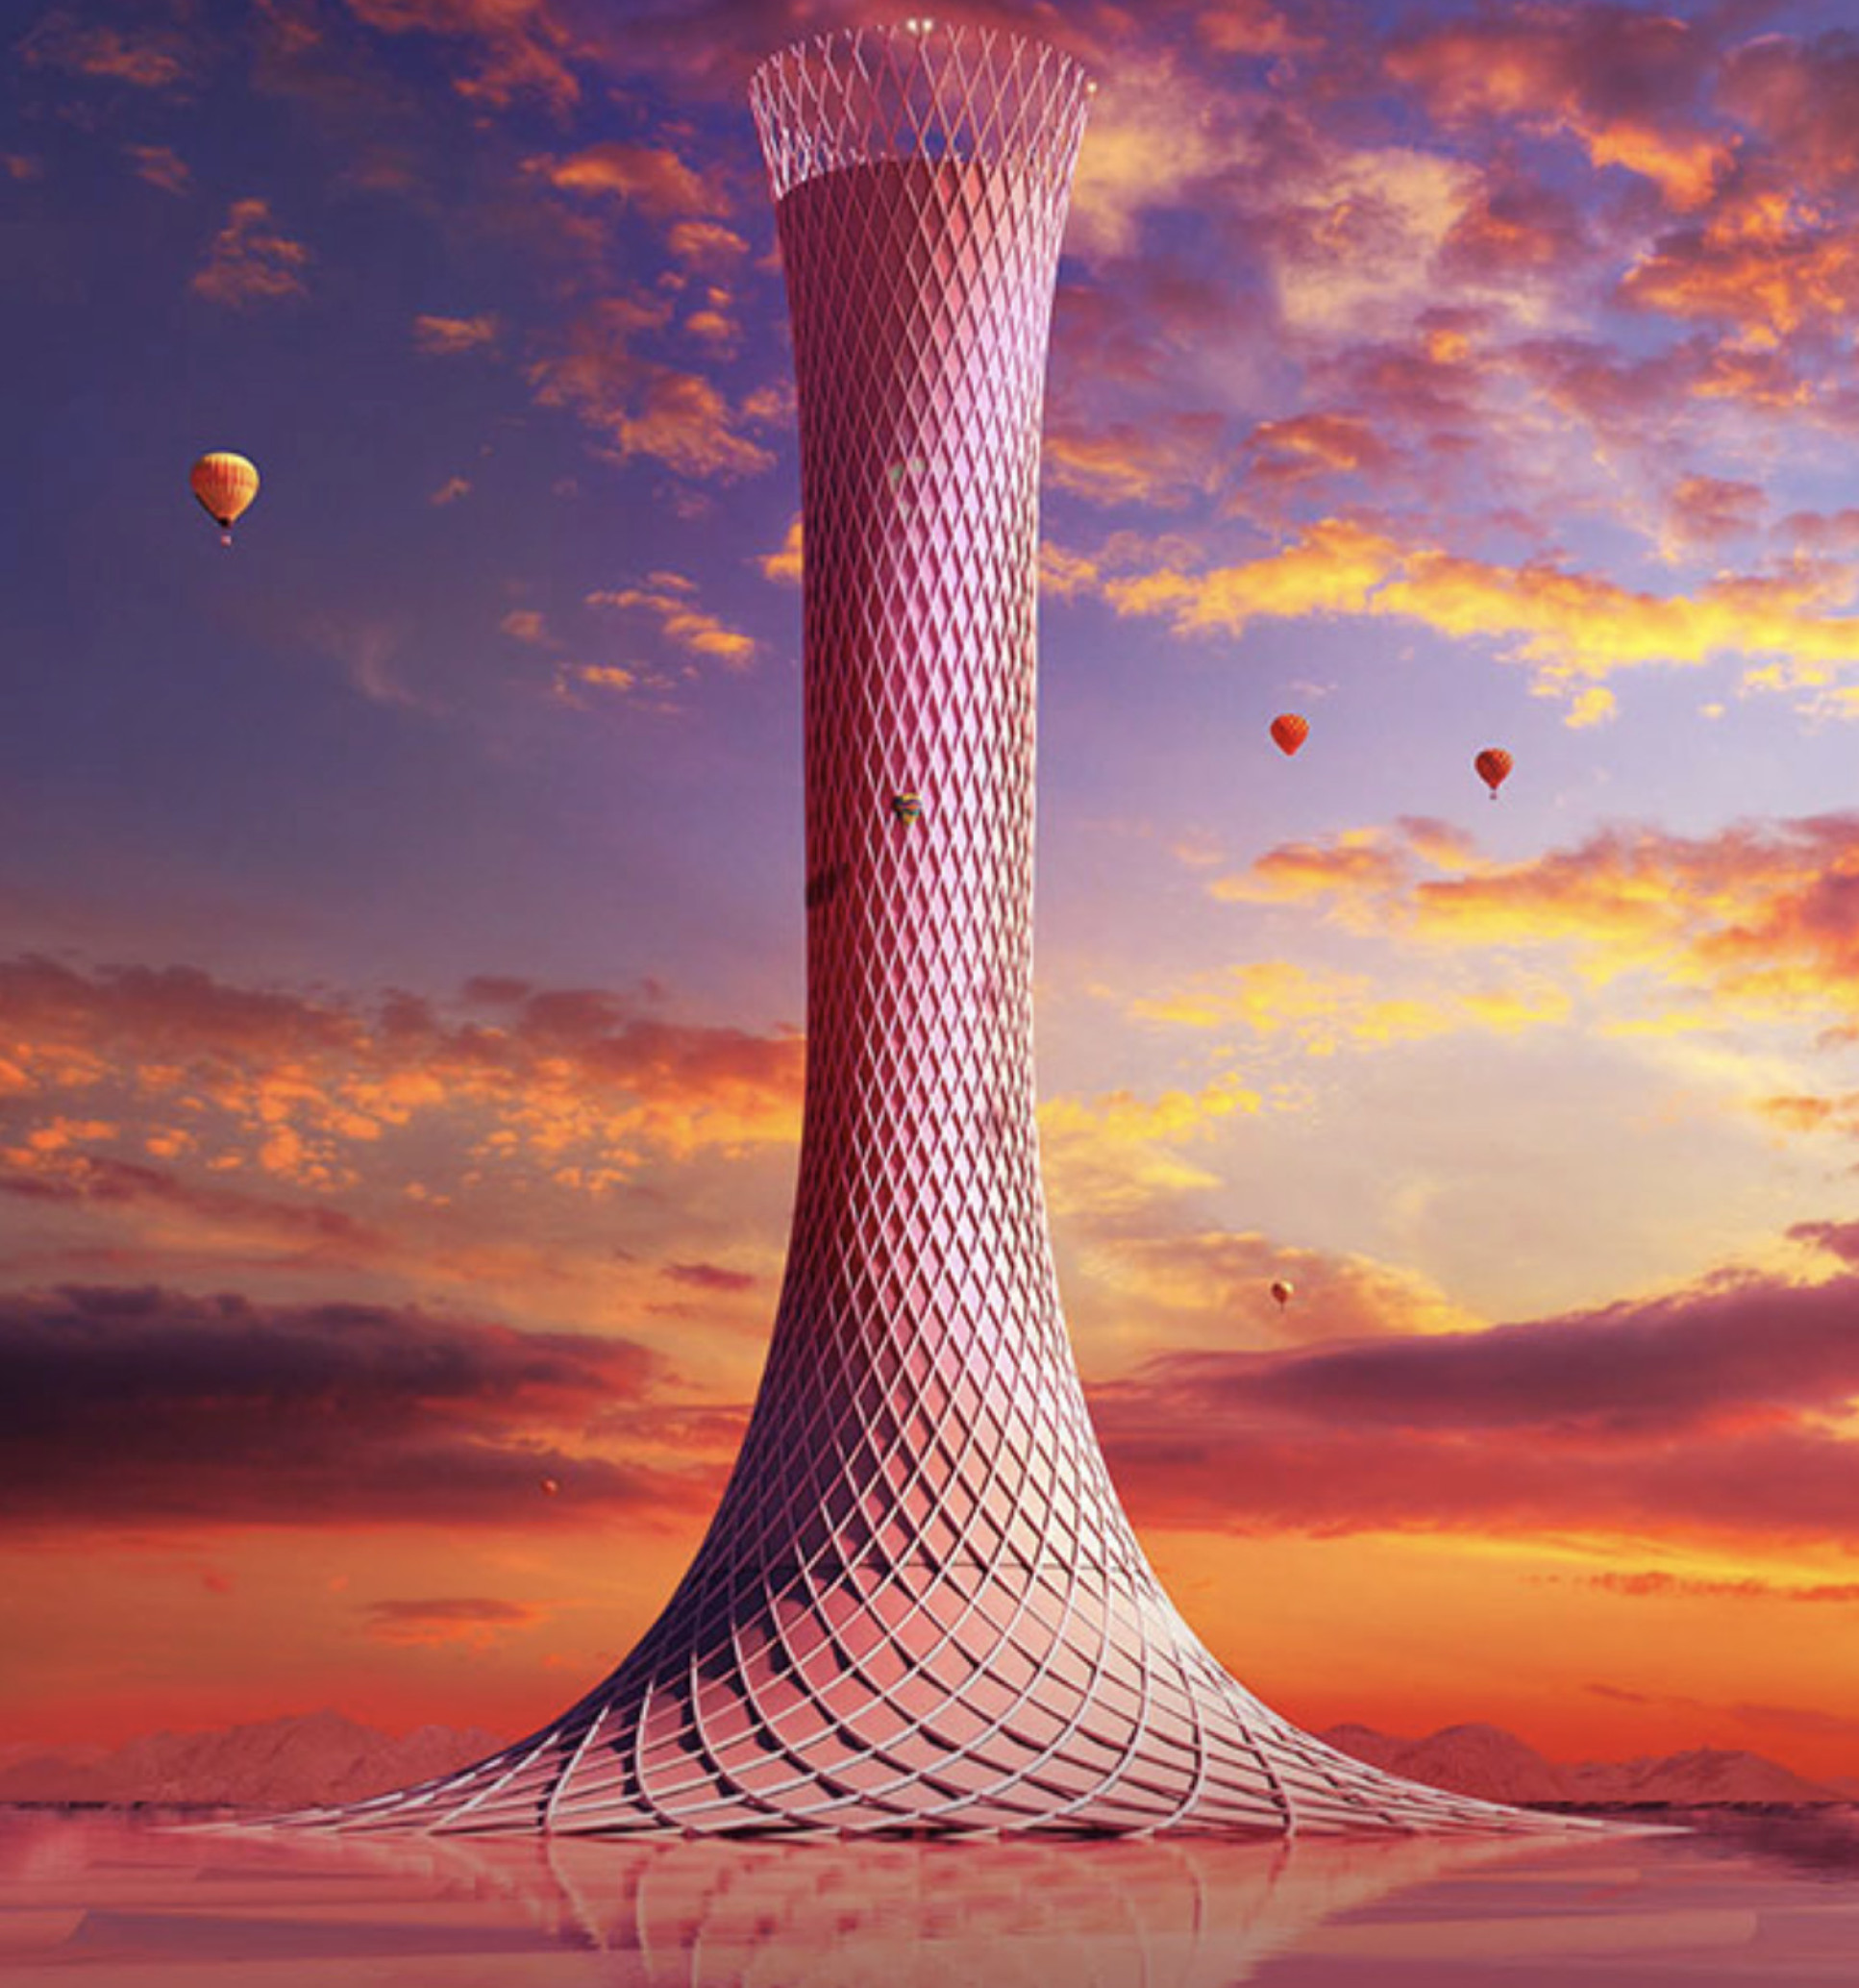 An artist's representation of the Solar Cyclone Tower